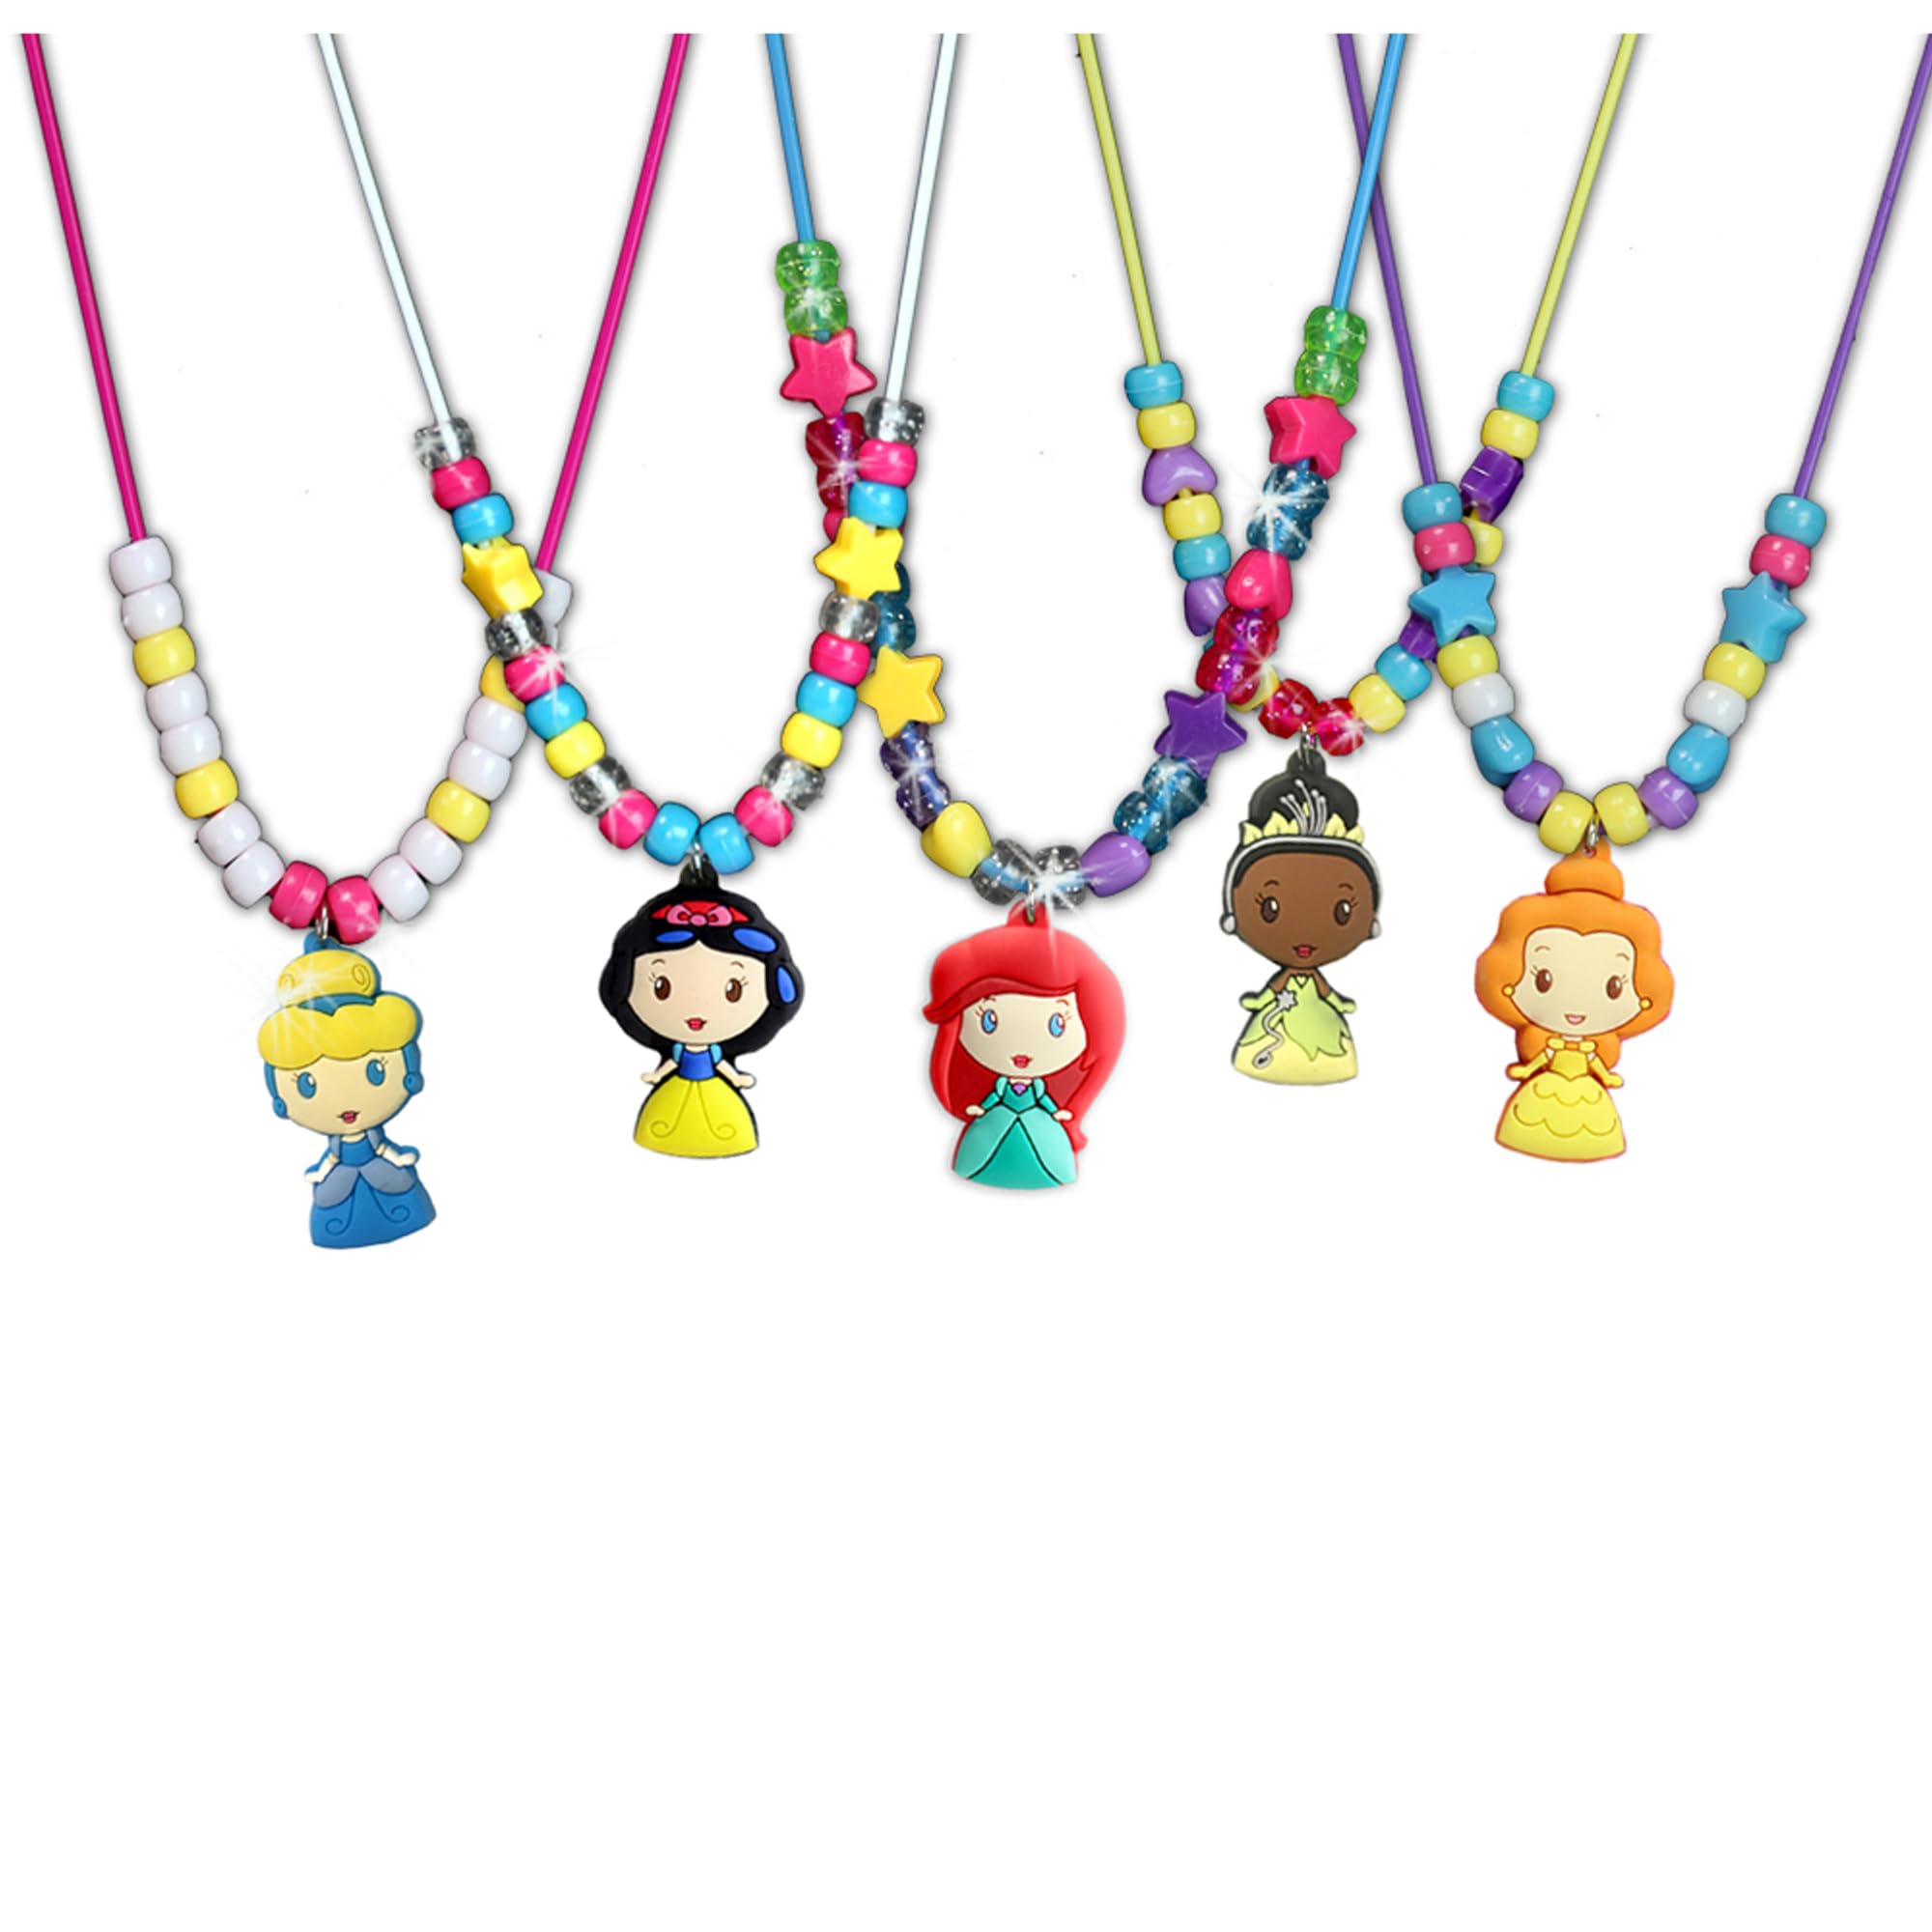 Tara Toys Disney Princess Necklace Activity Set, Create your own jewelry, easy for little hands [Amazon Exclusive] 9.7x8.18x2